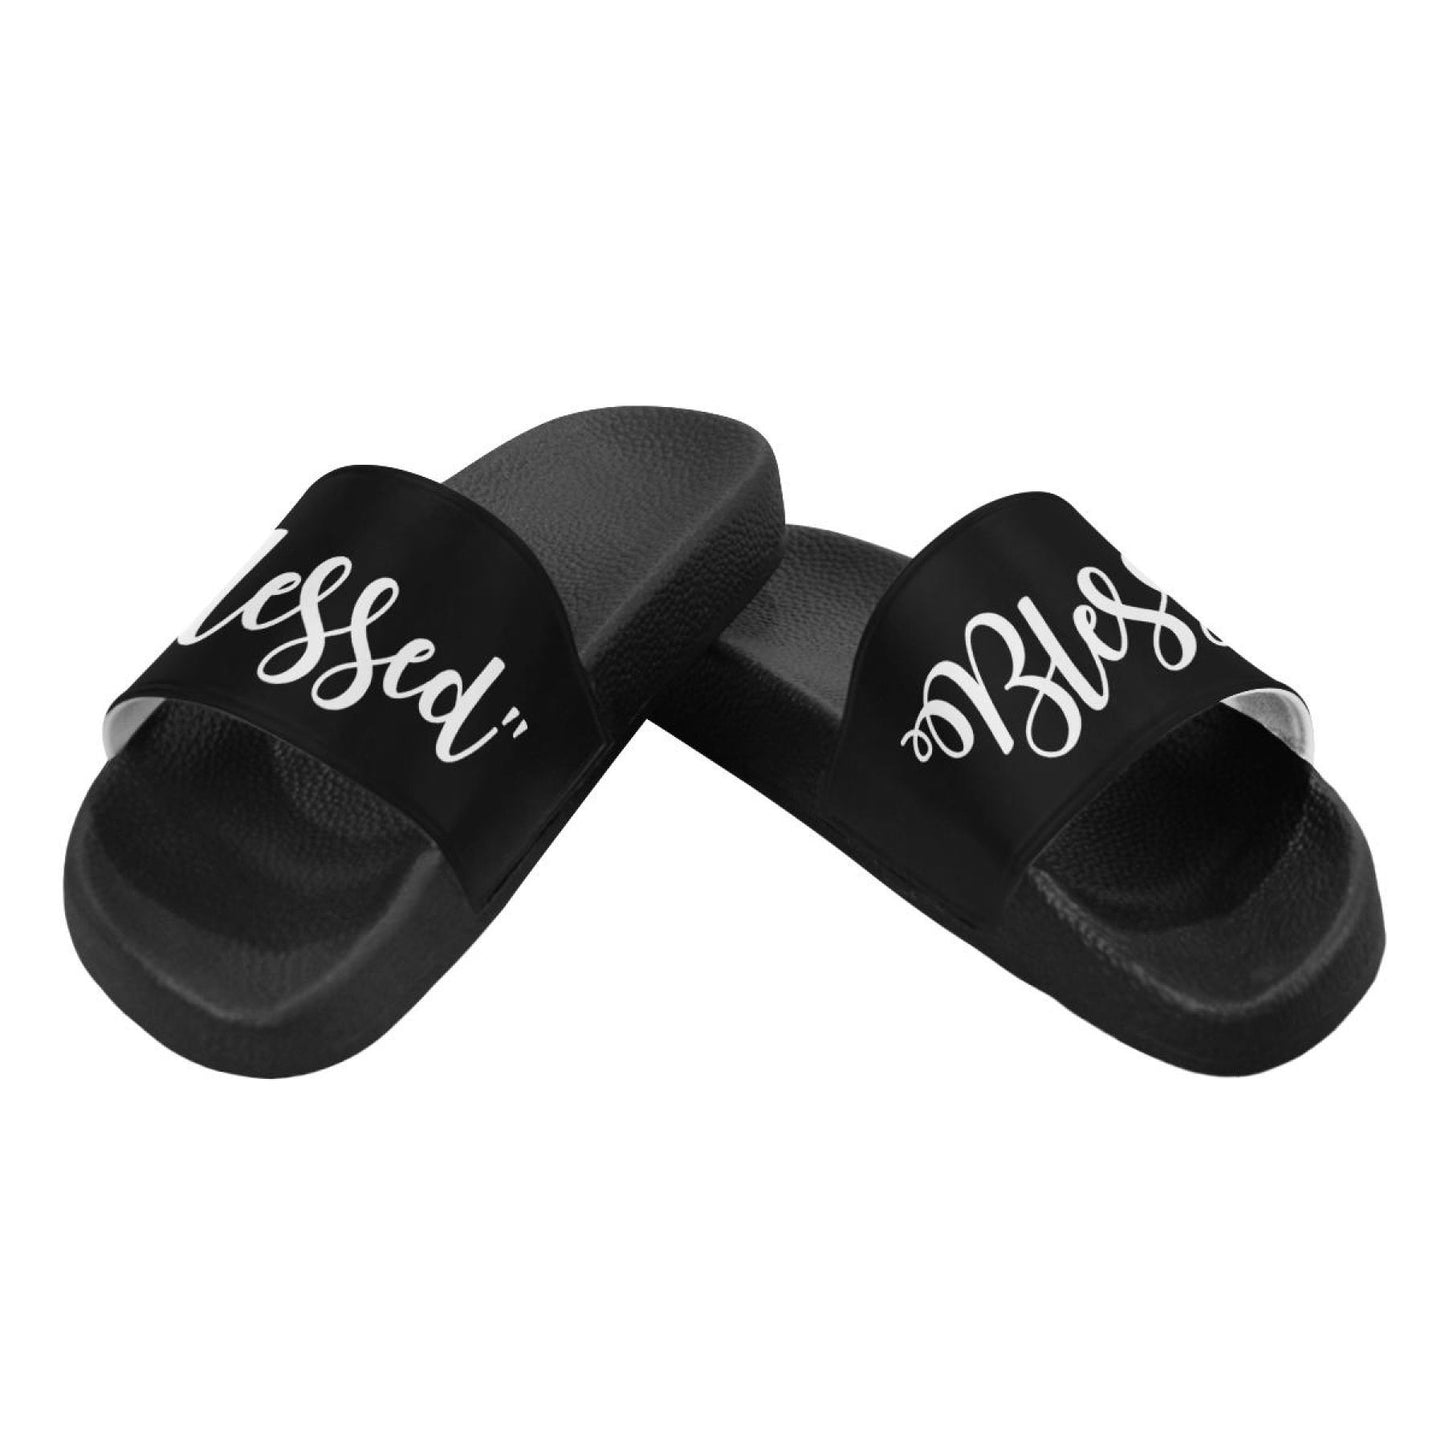 Flip-Flop Sandals, Blessed Graphic Style Womens Slides